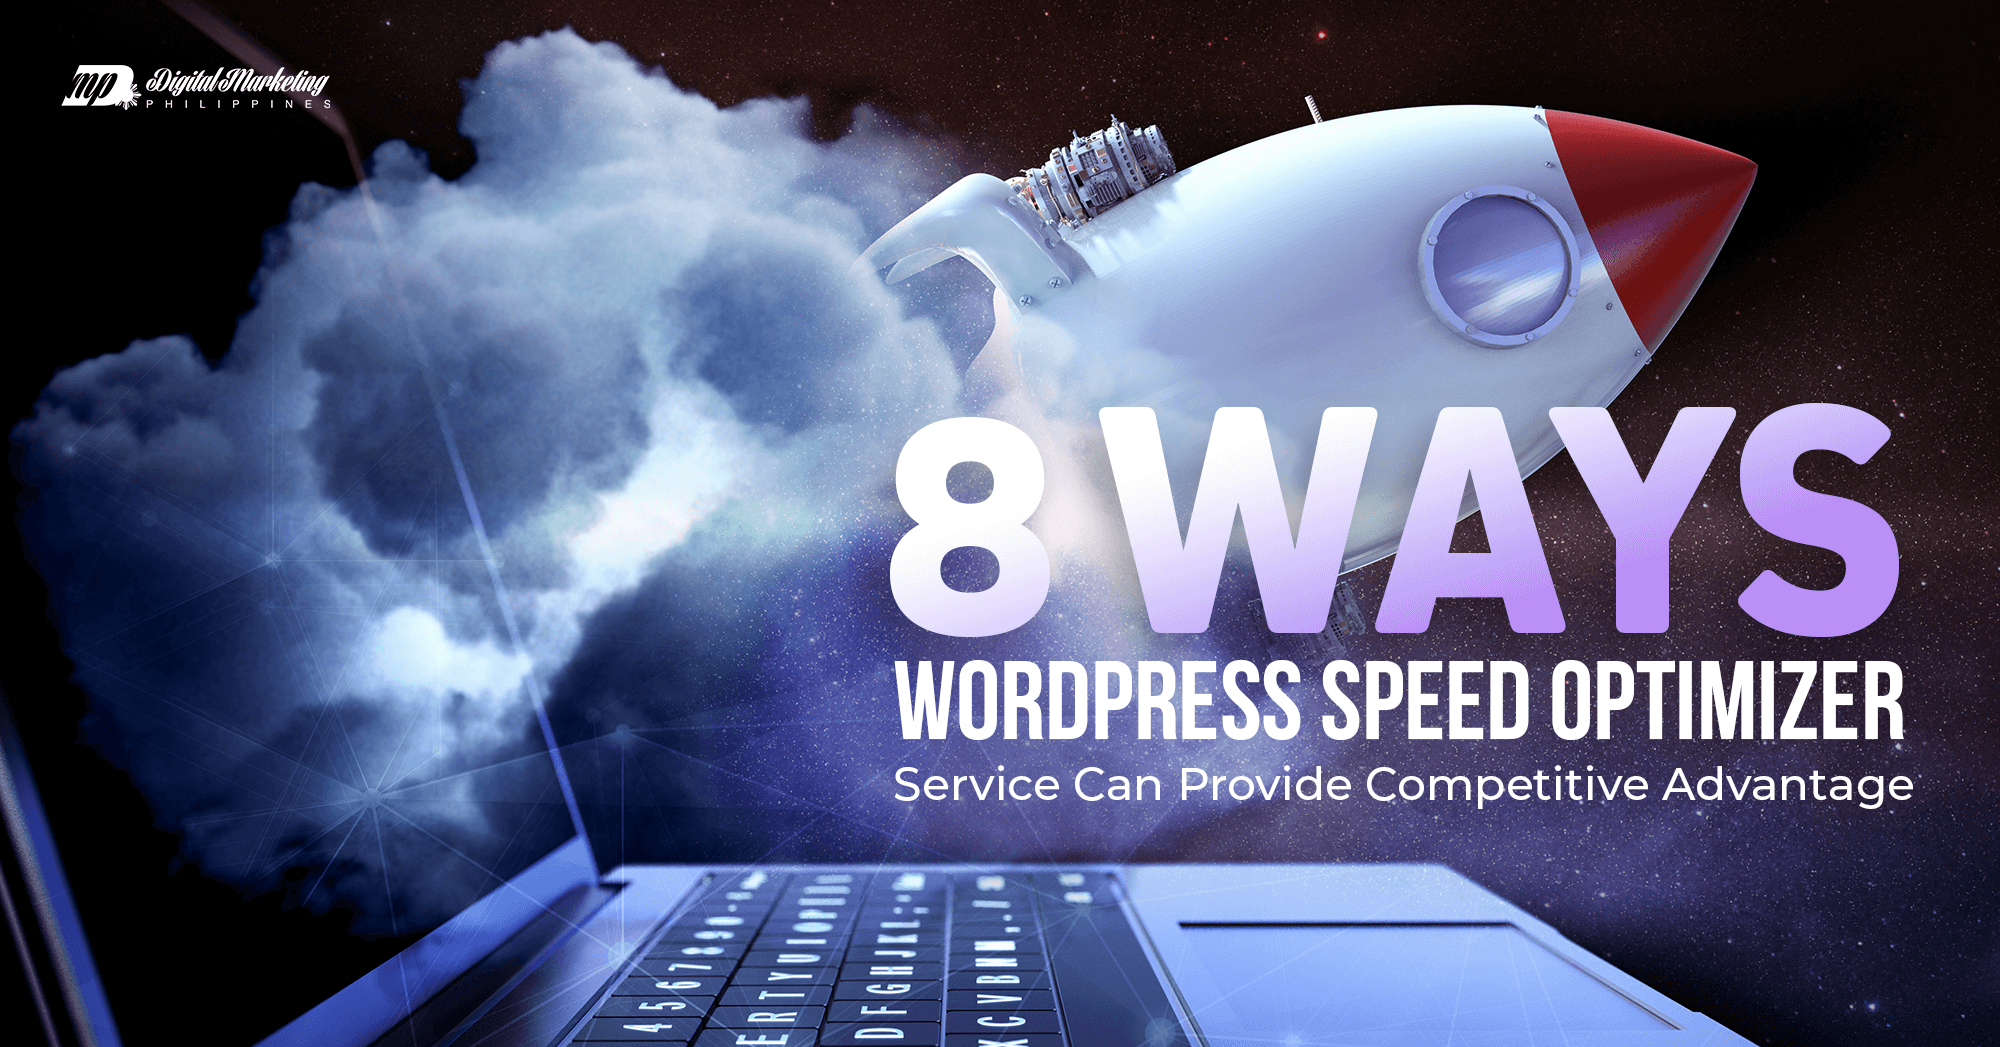 8 Ways WordPress Speed Optimizer Service Can Provide Competitive Advantage featured image